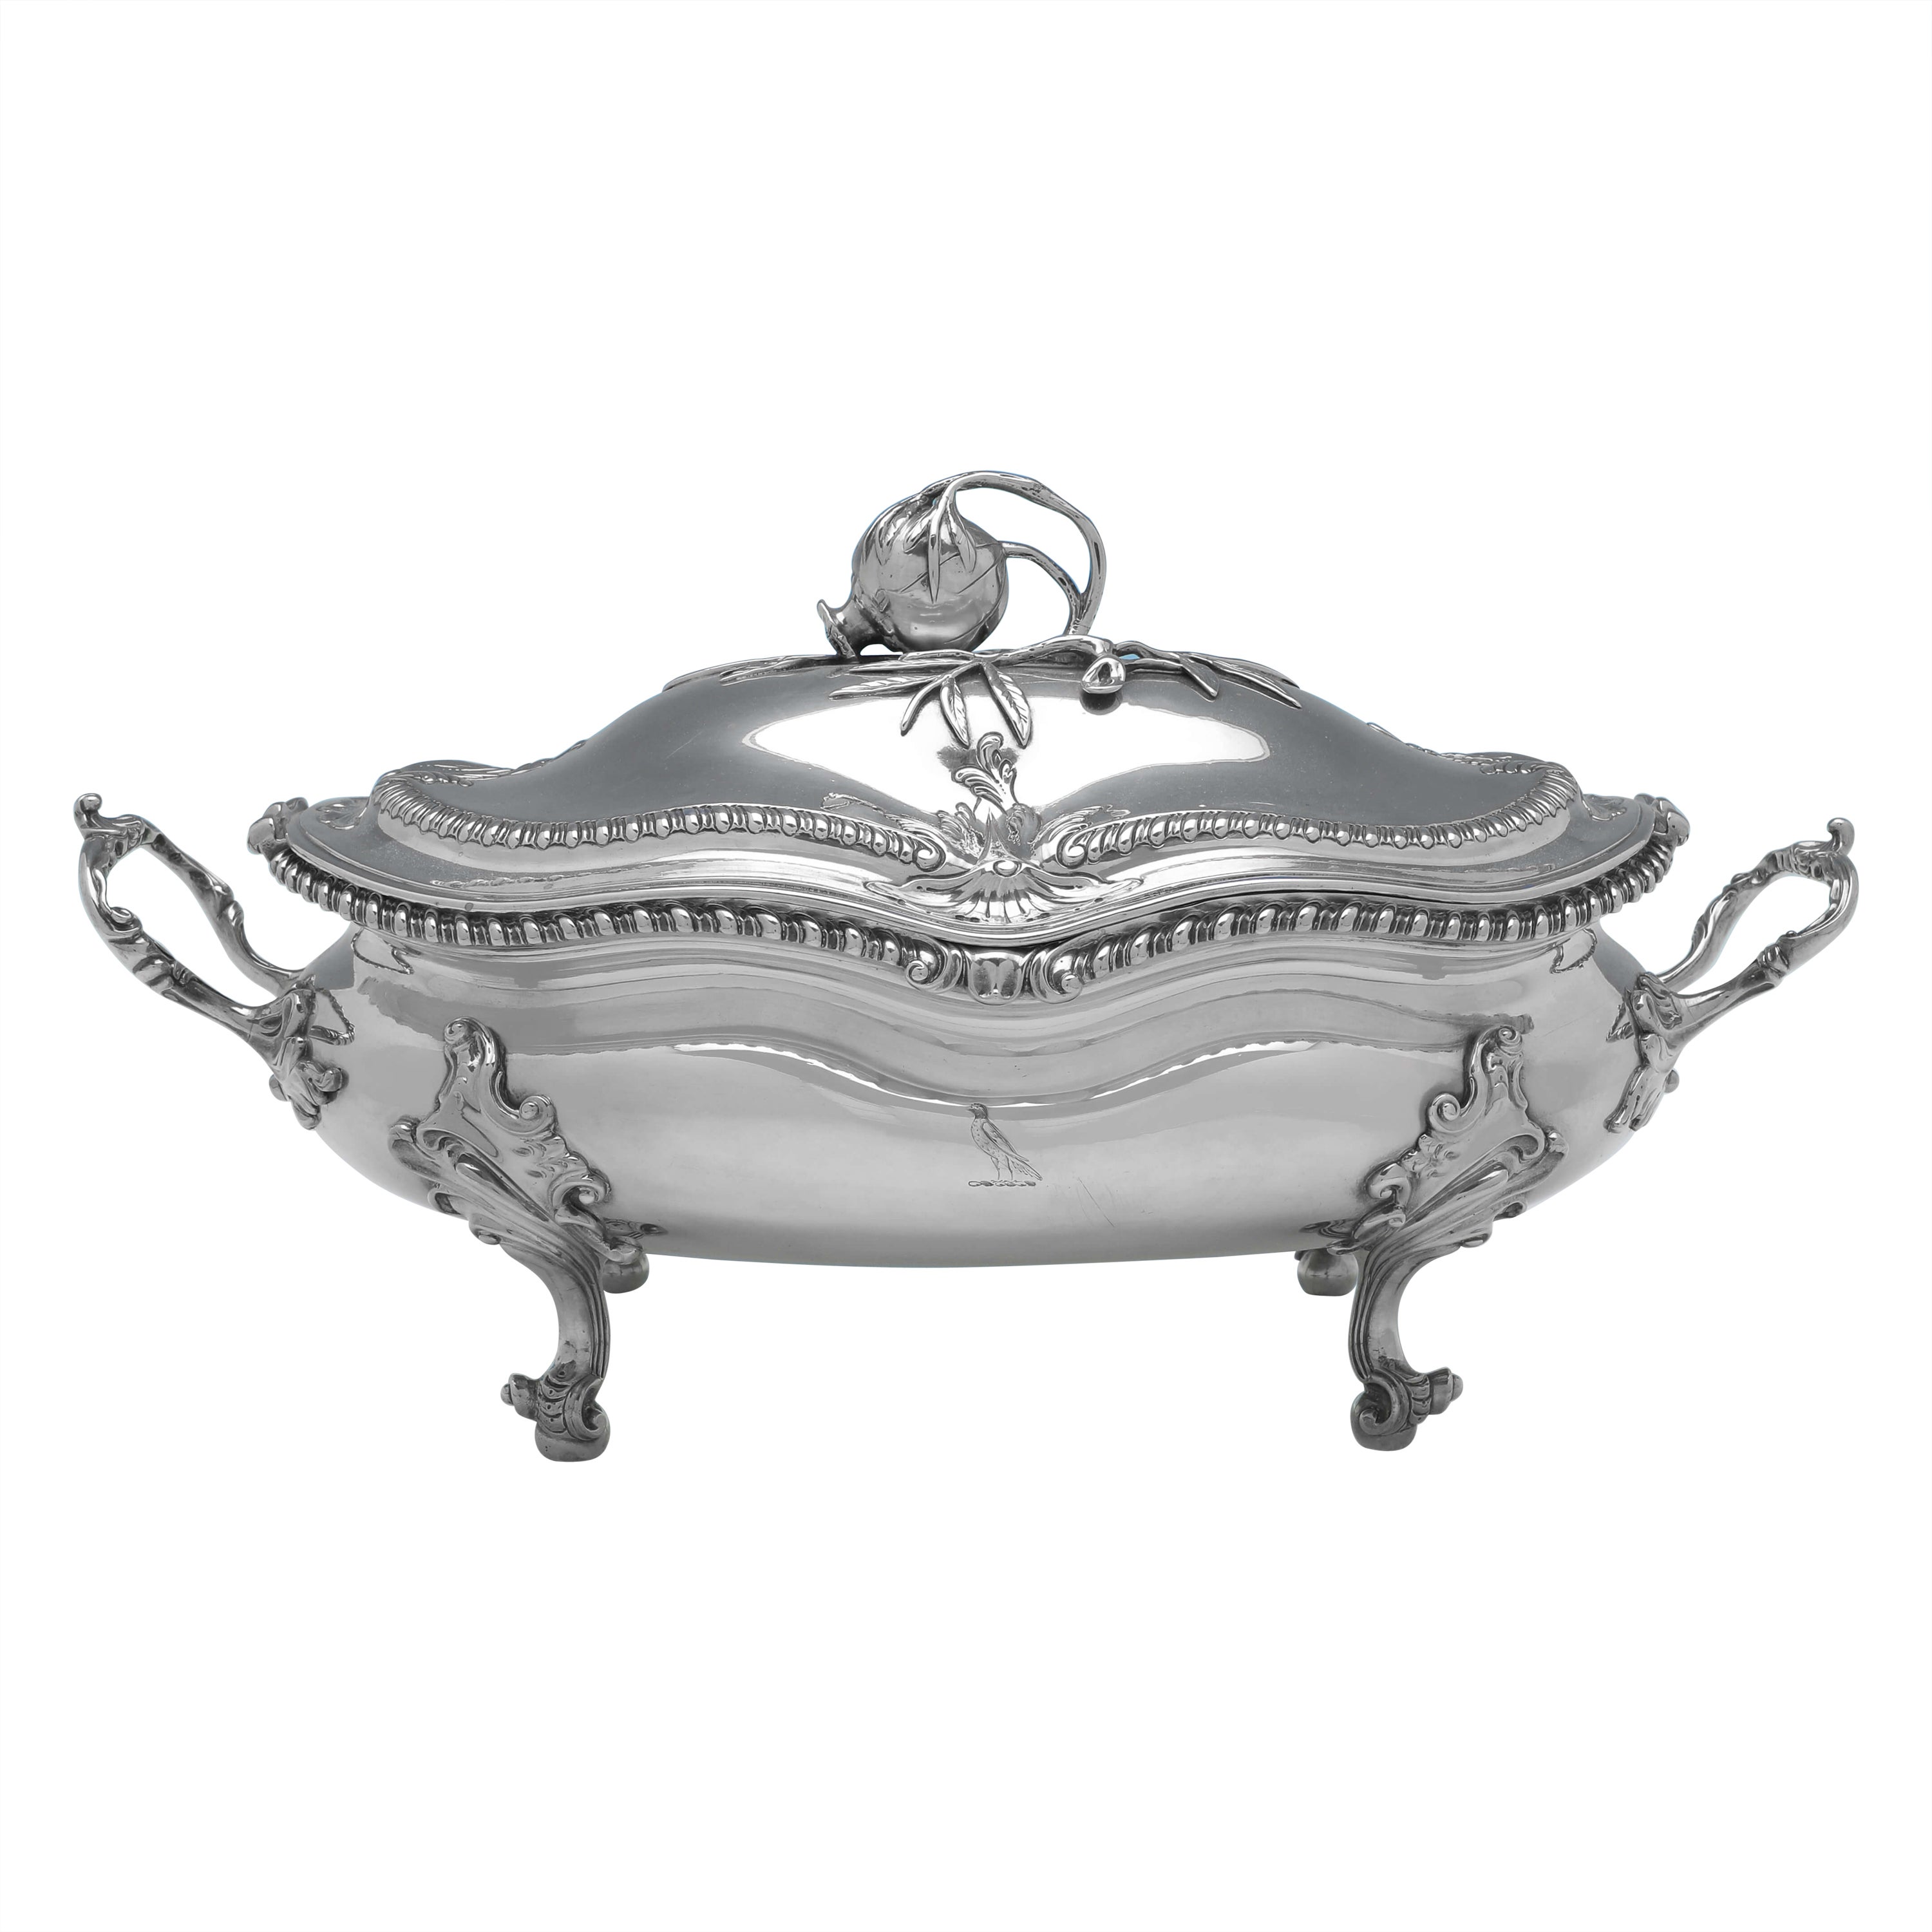 George III Antique Sterling Silver Soup Tureen, S & J Crespell, London, 1772